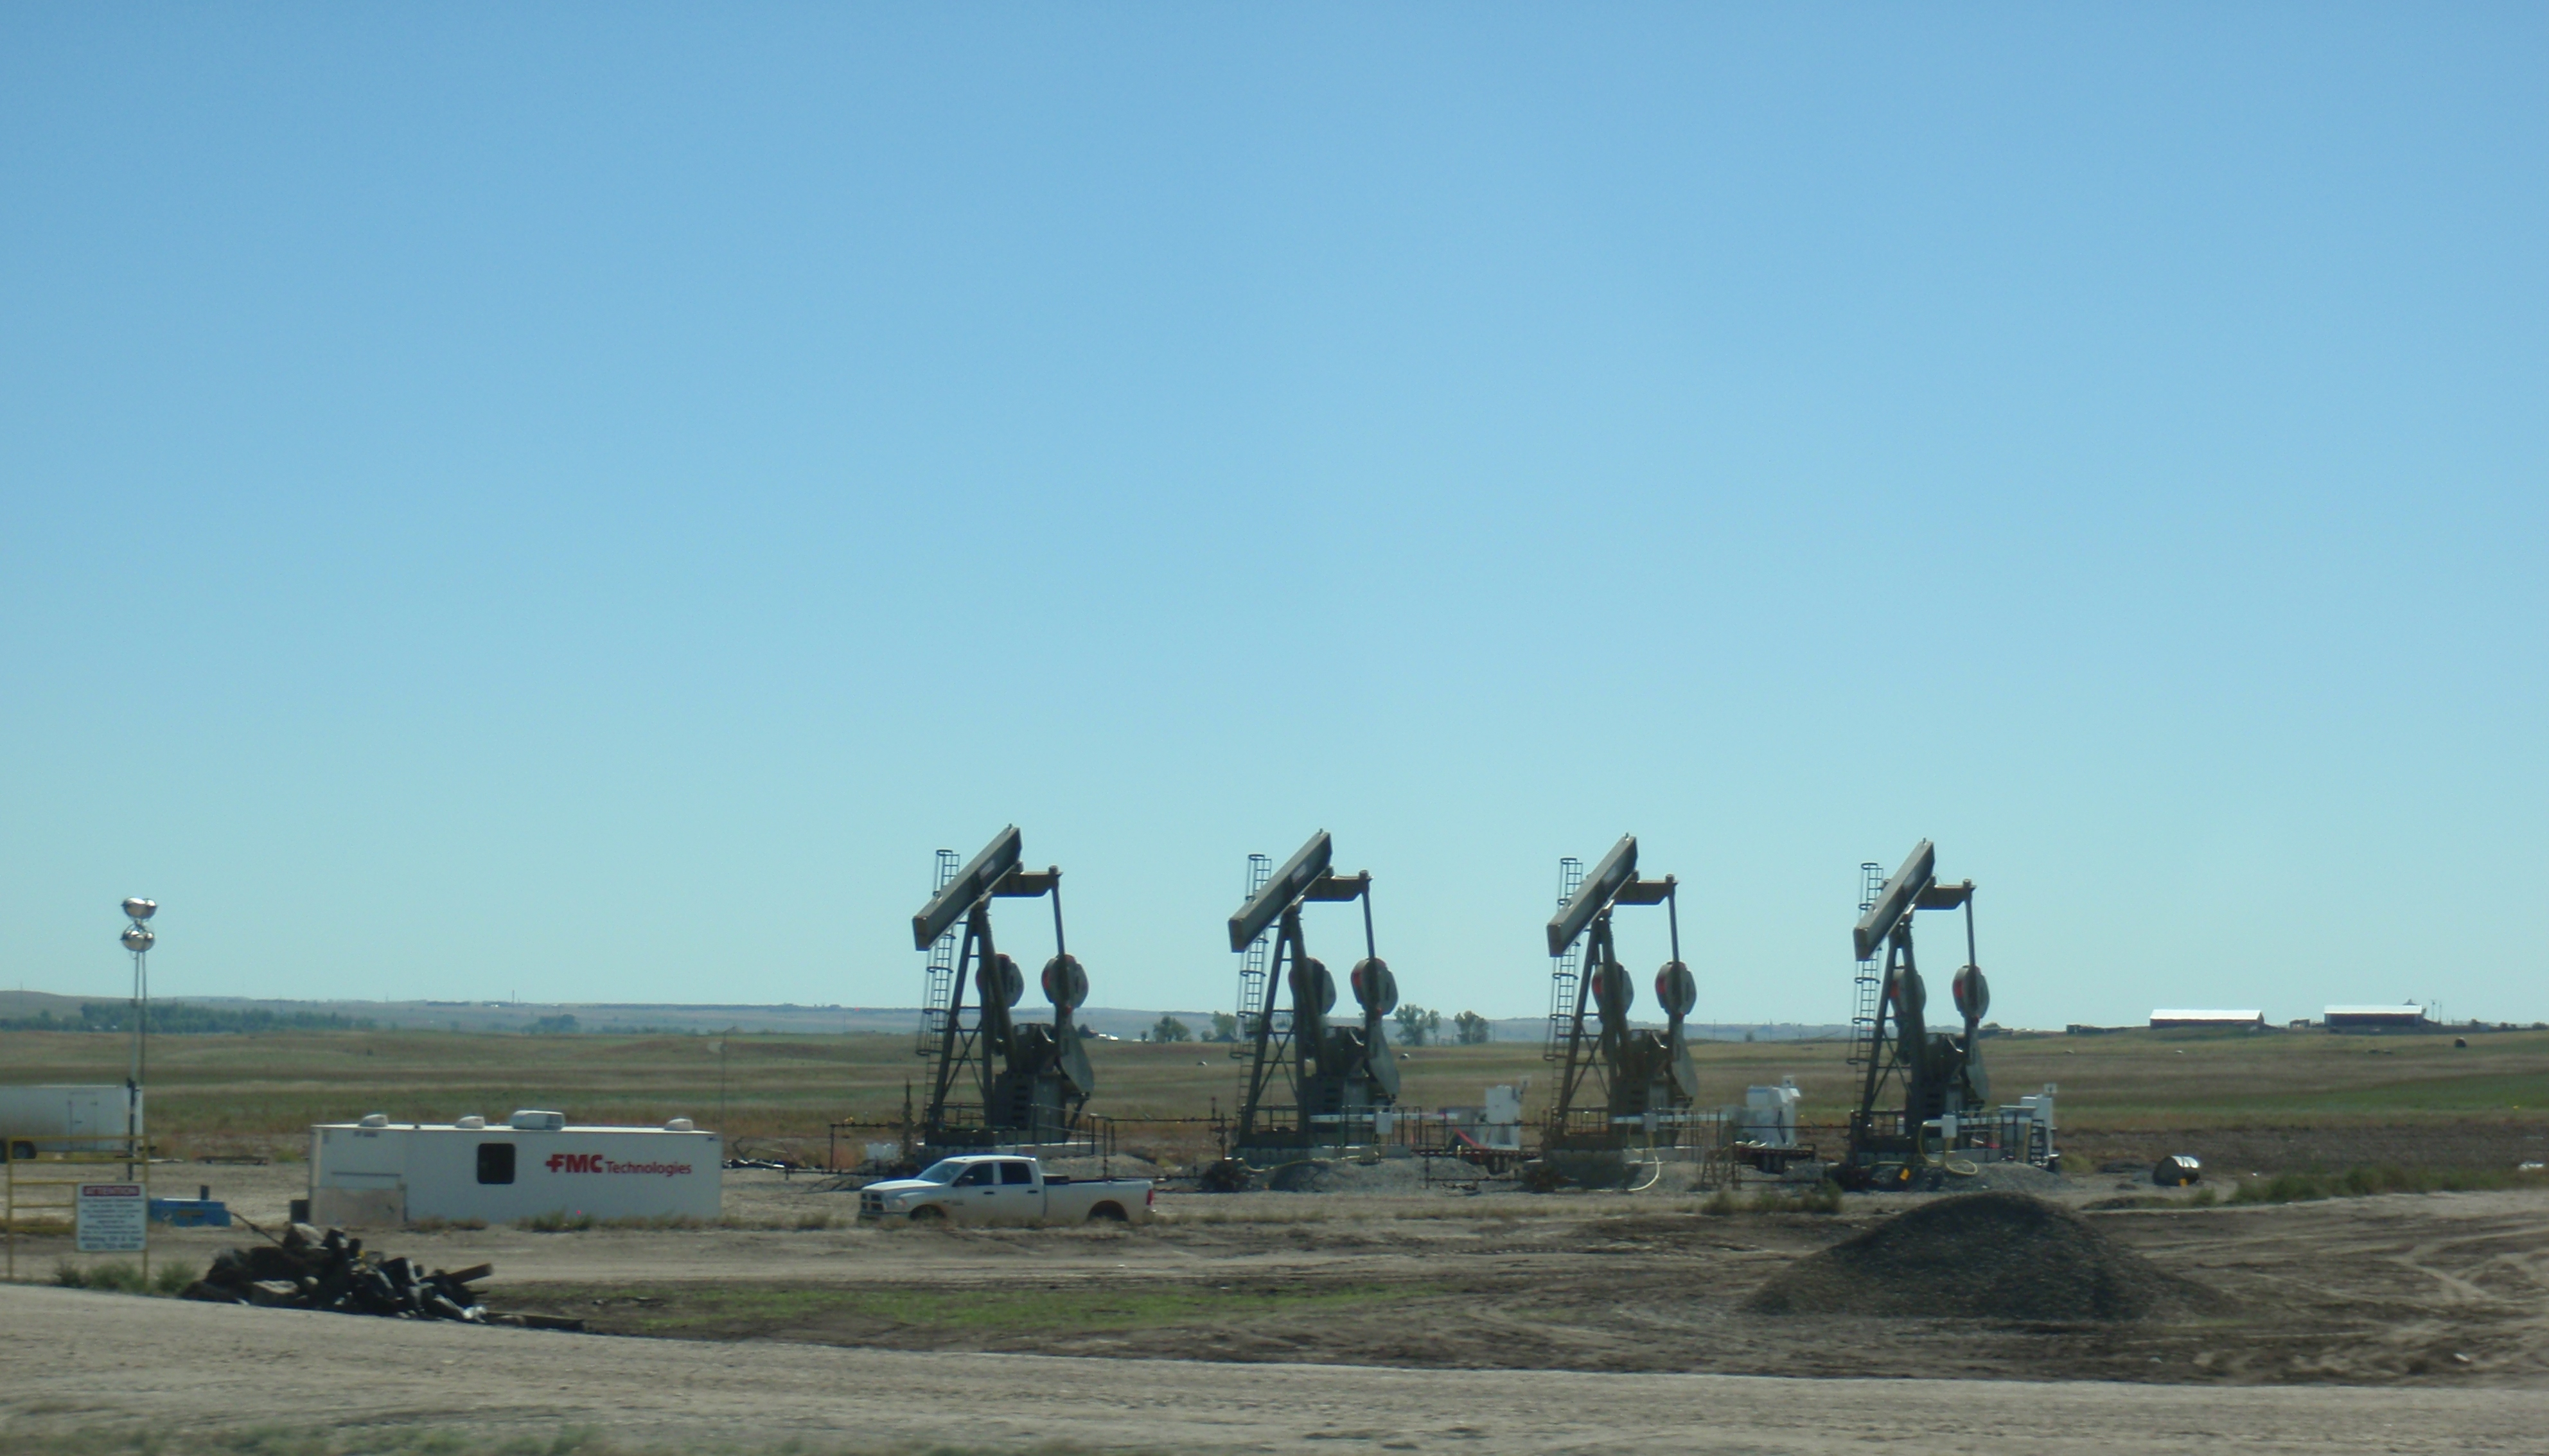 Pumps on new wells being installed in 9/15. Not exactly a sign of a collapsed industry. Photo by James Ulvog.